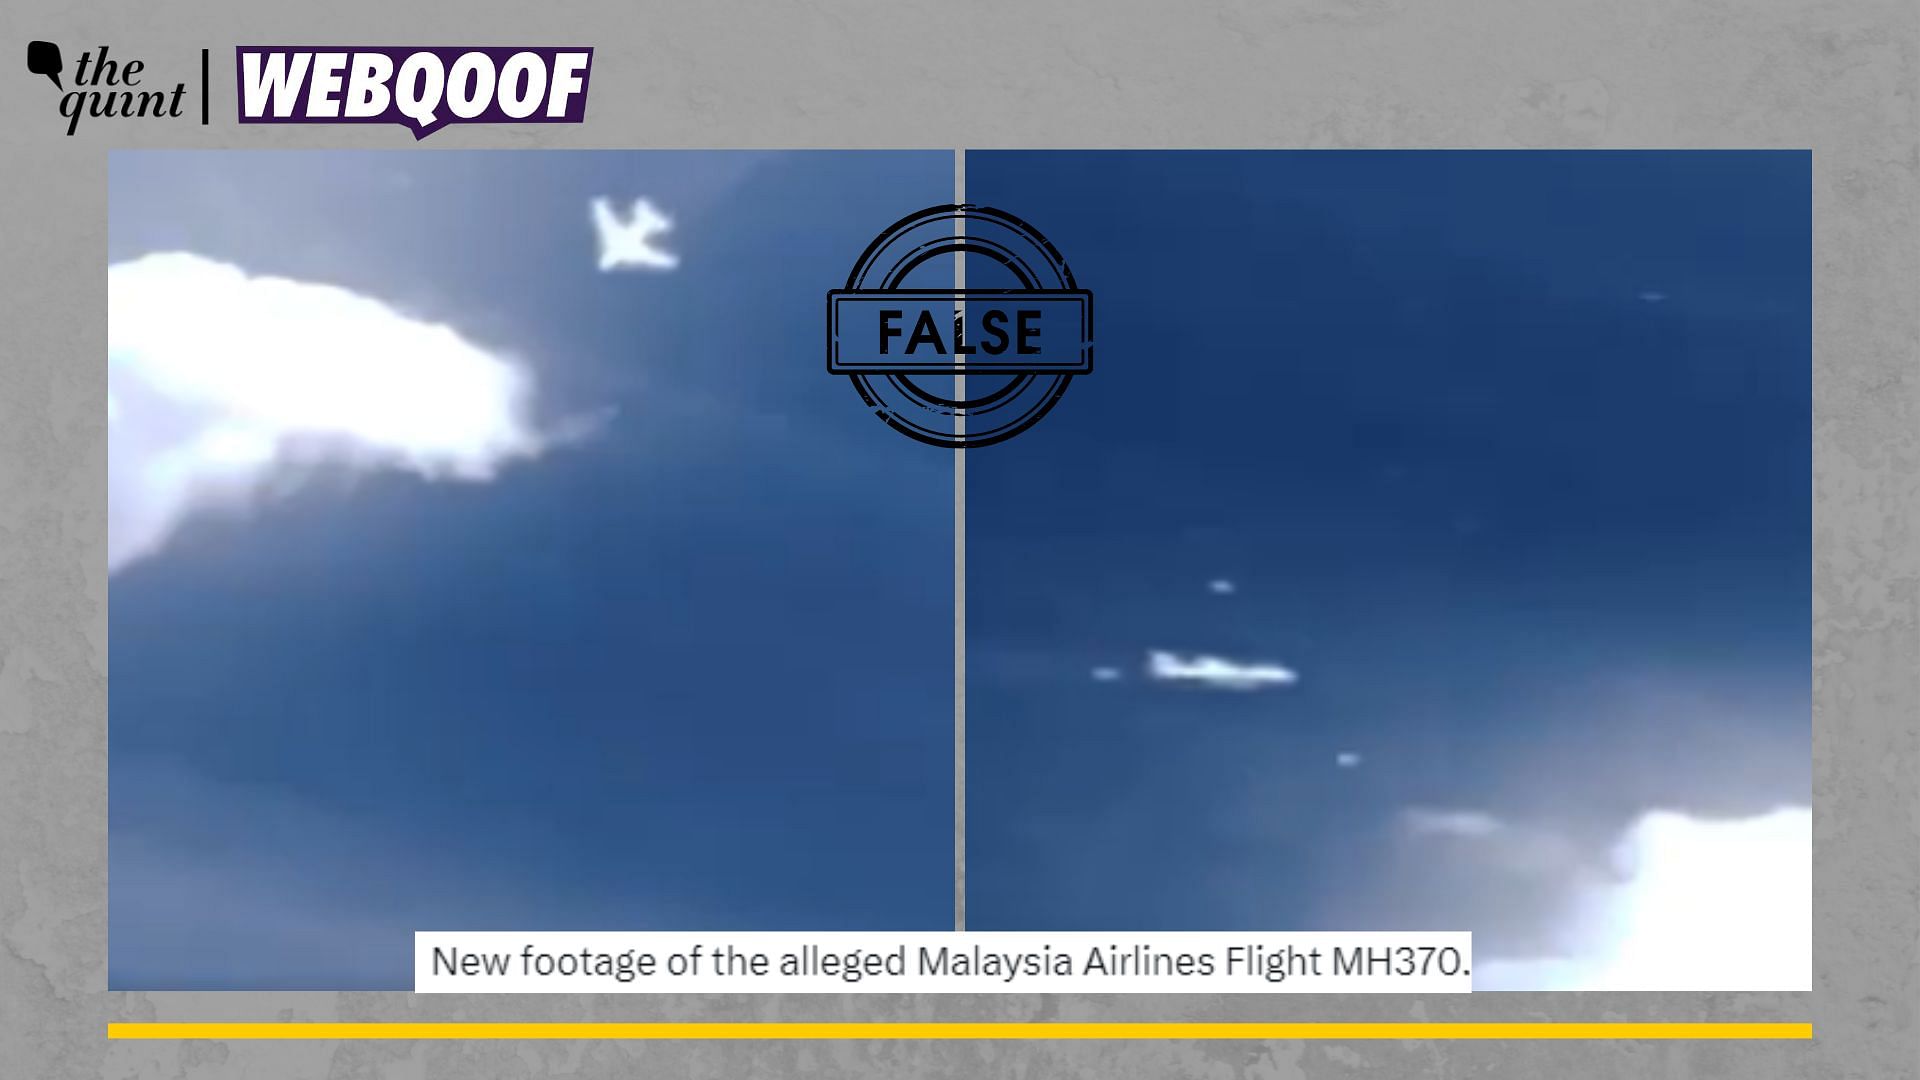 No, This Video Does Not Show the Moment Malaysian Aircraft MH370 Went Missing